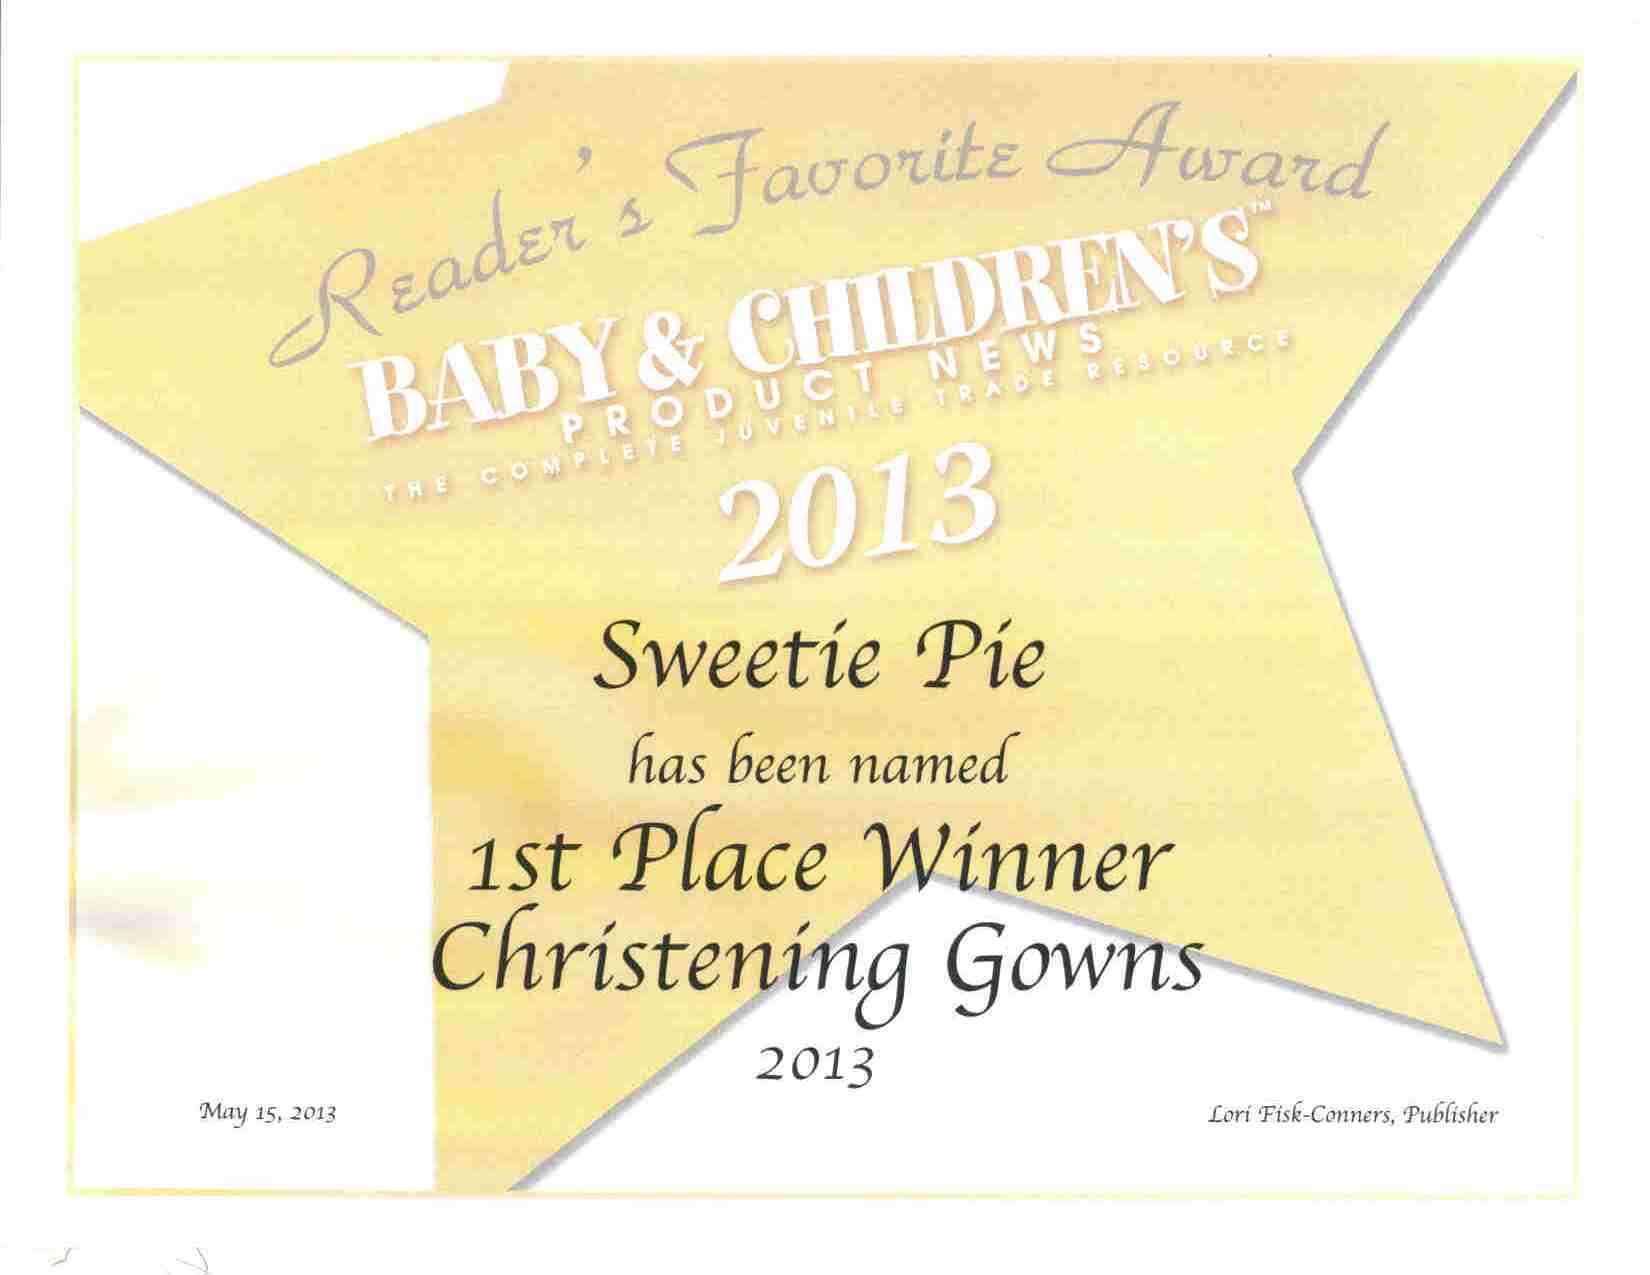 Voted 1st Place Christening Gown Company Award